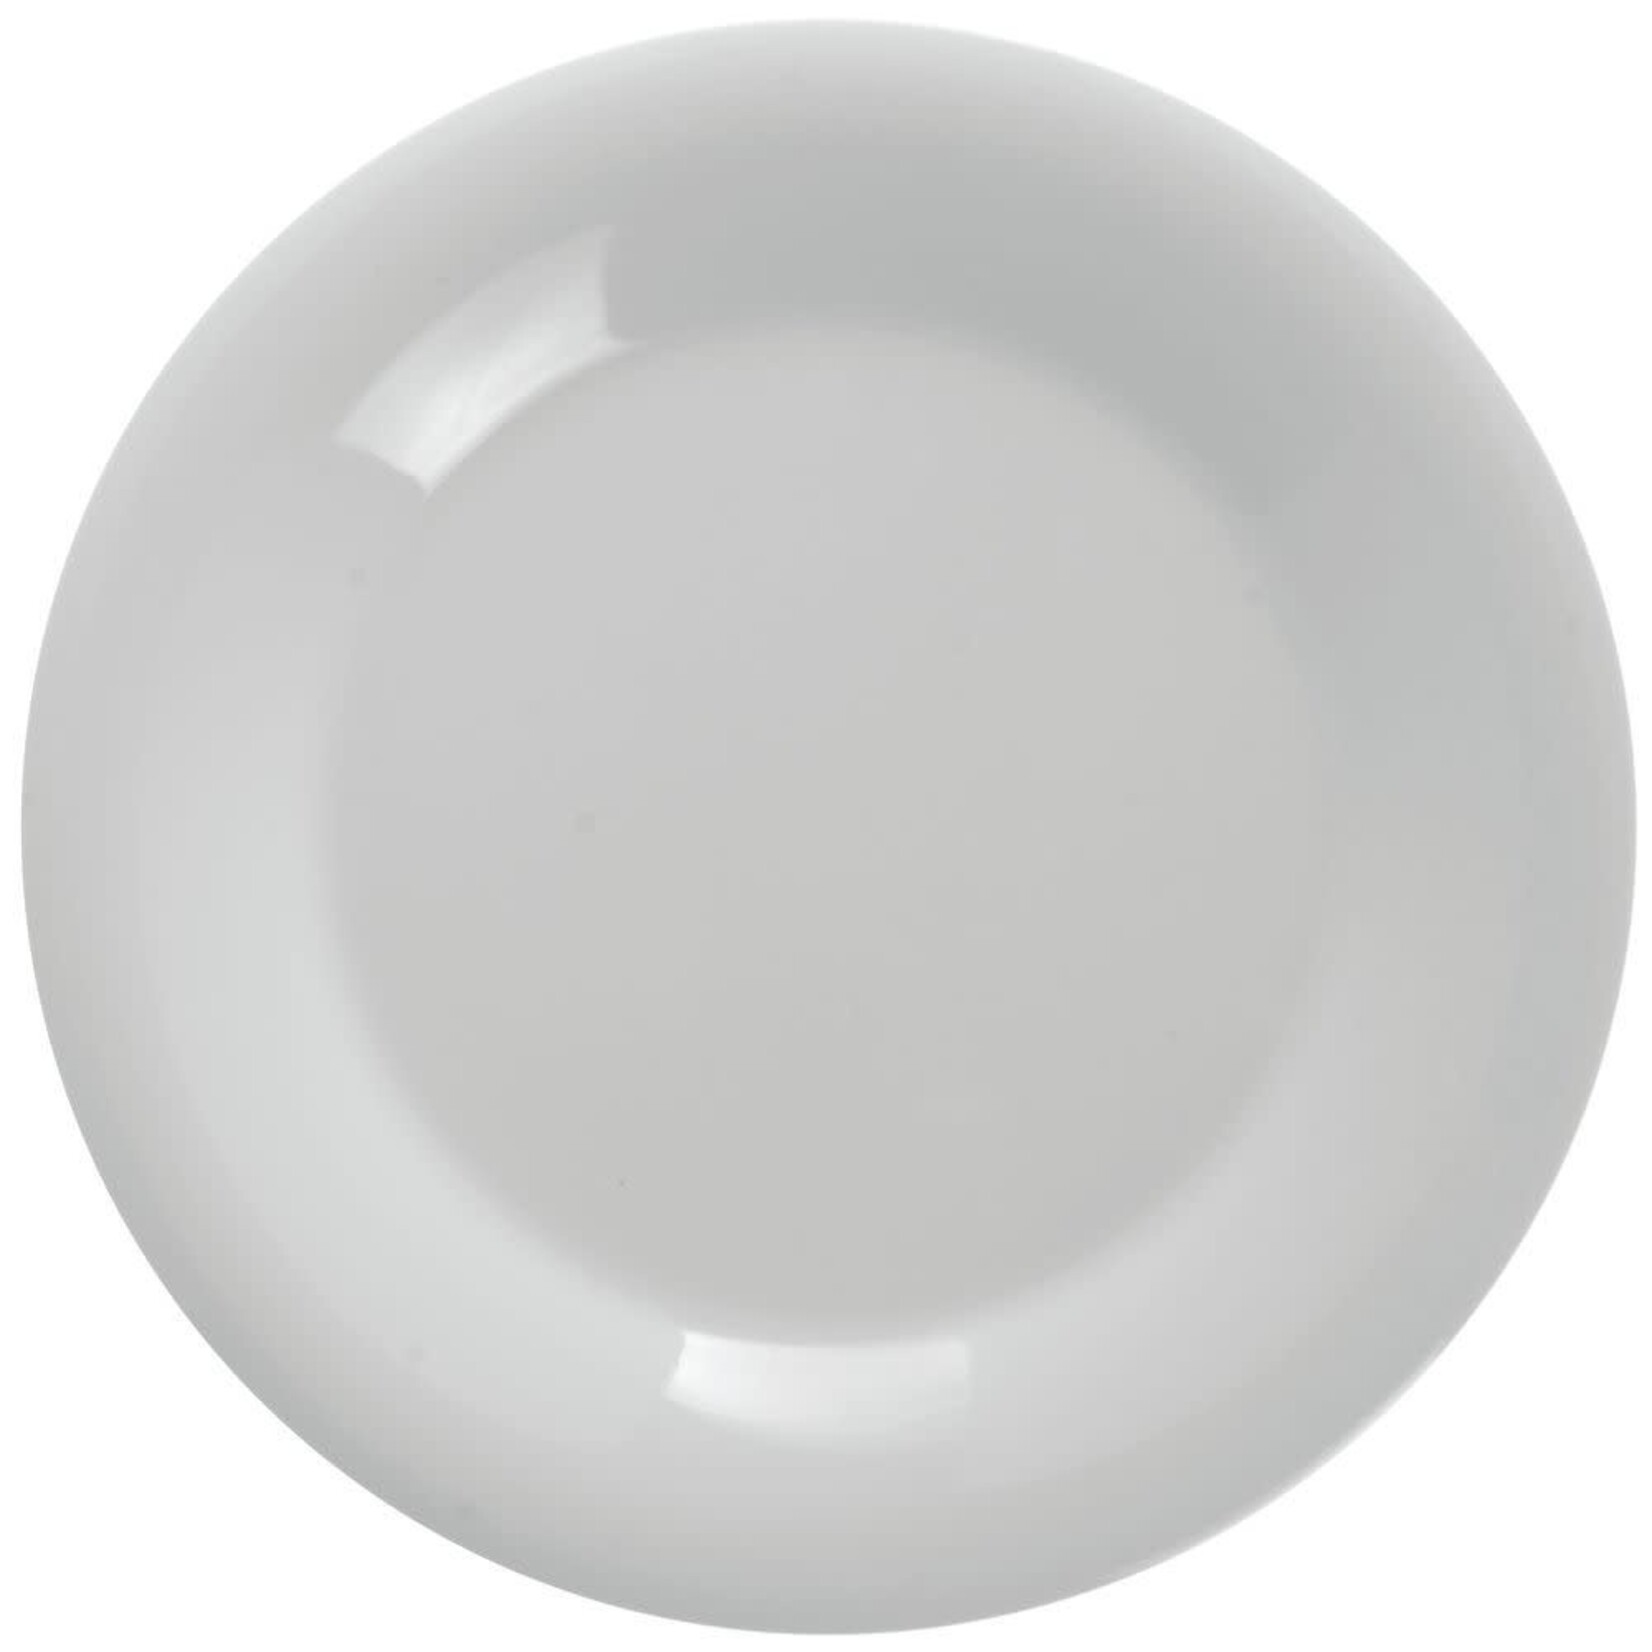 Palate and Plate Aw-5018S 9.5" round melamine dinner plate 24/case